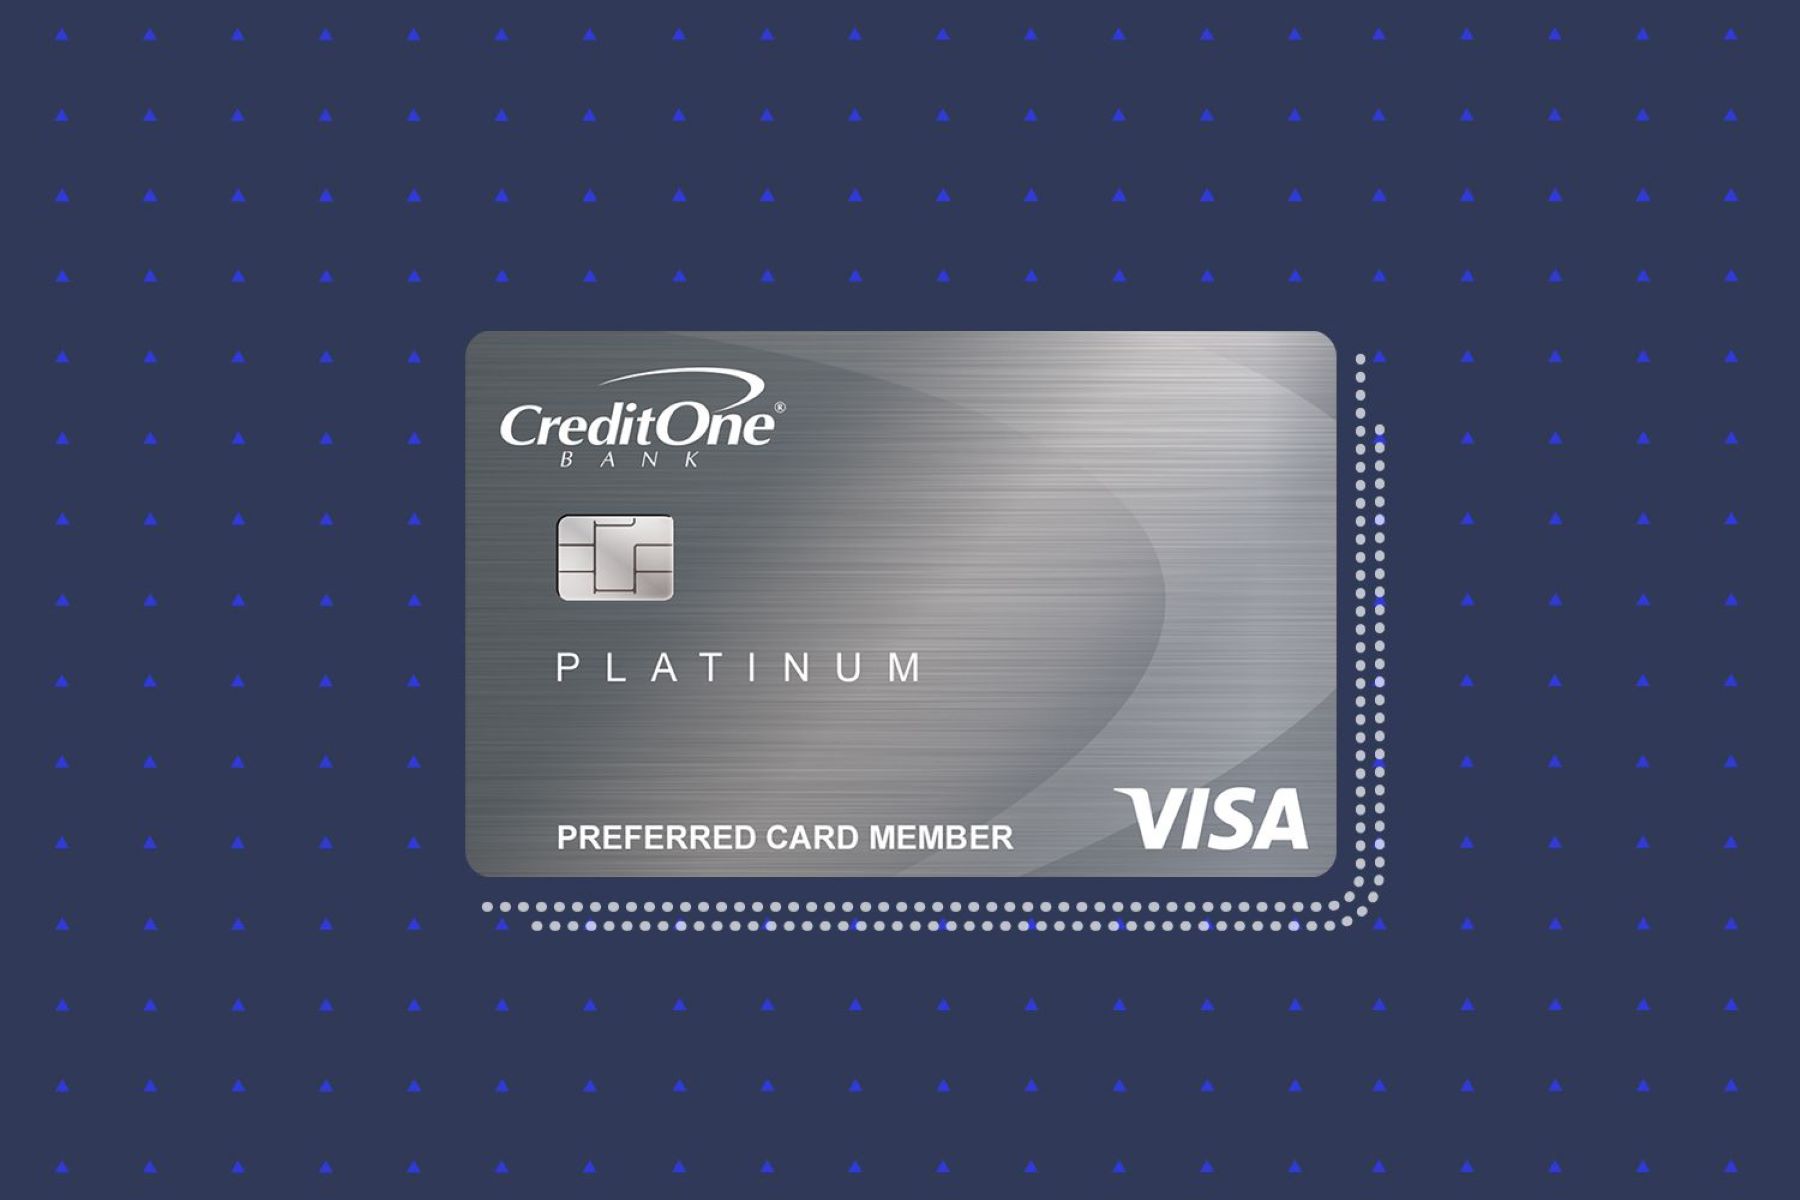 How To Use A Capital One Platinum Credit Card